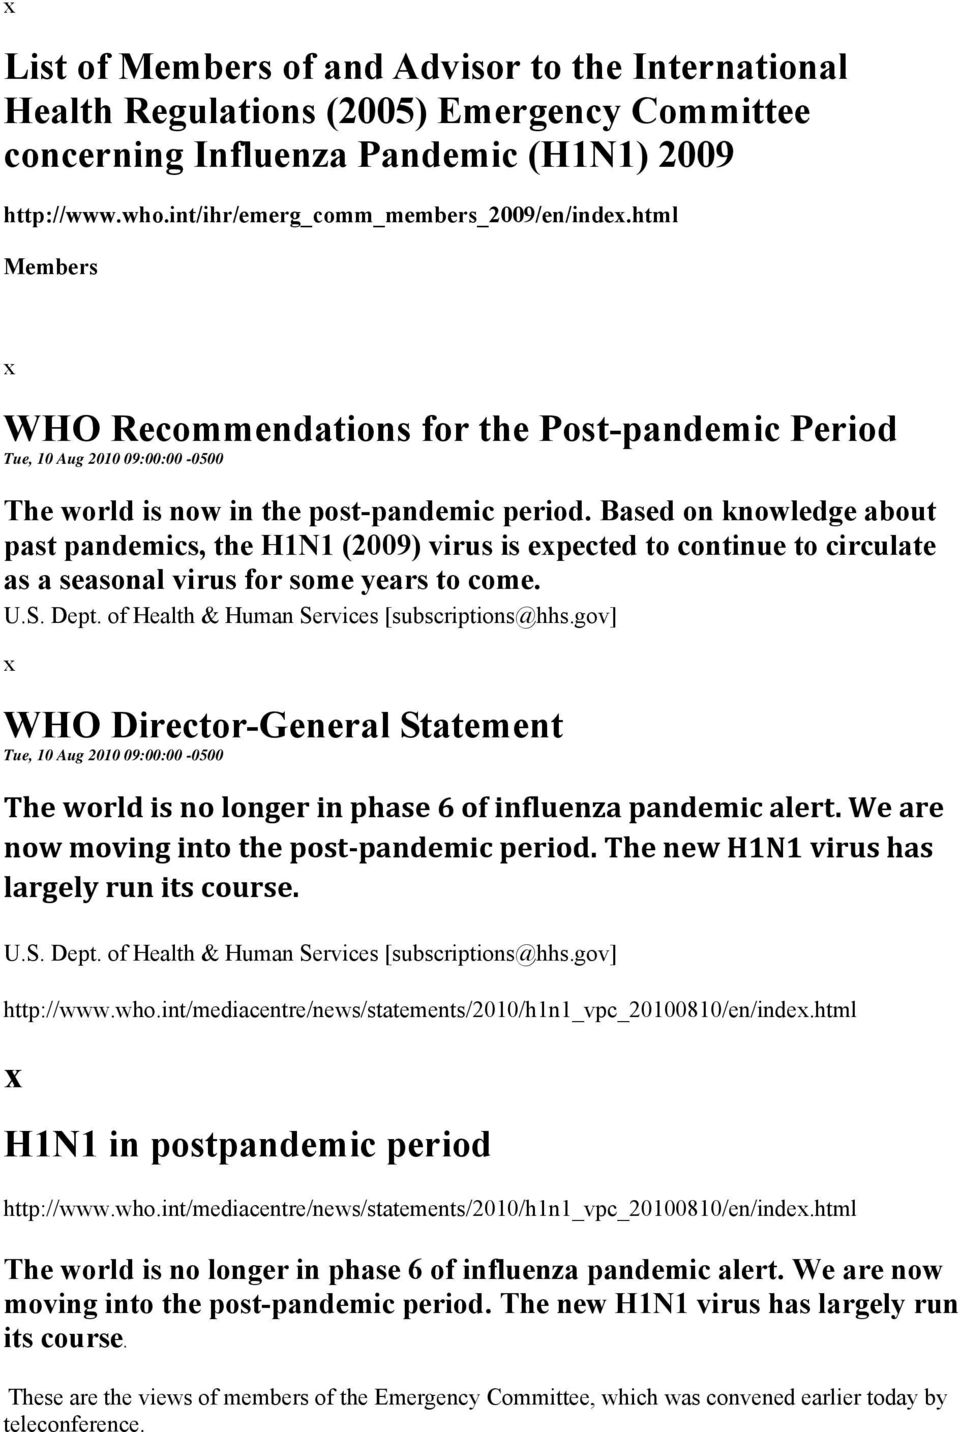 Based on knowledge about past pandemics, the H1N1 (2009) virus is epected to continue to circulate as a seasonal virus for some years to come. U.S. Dept. of Health & Human Services [subscriptions@hhs.